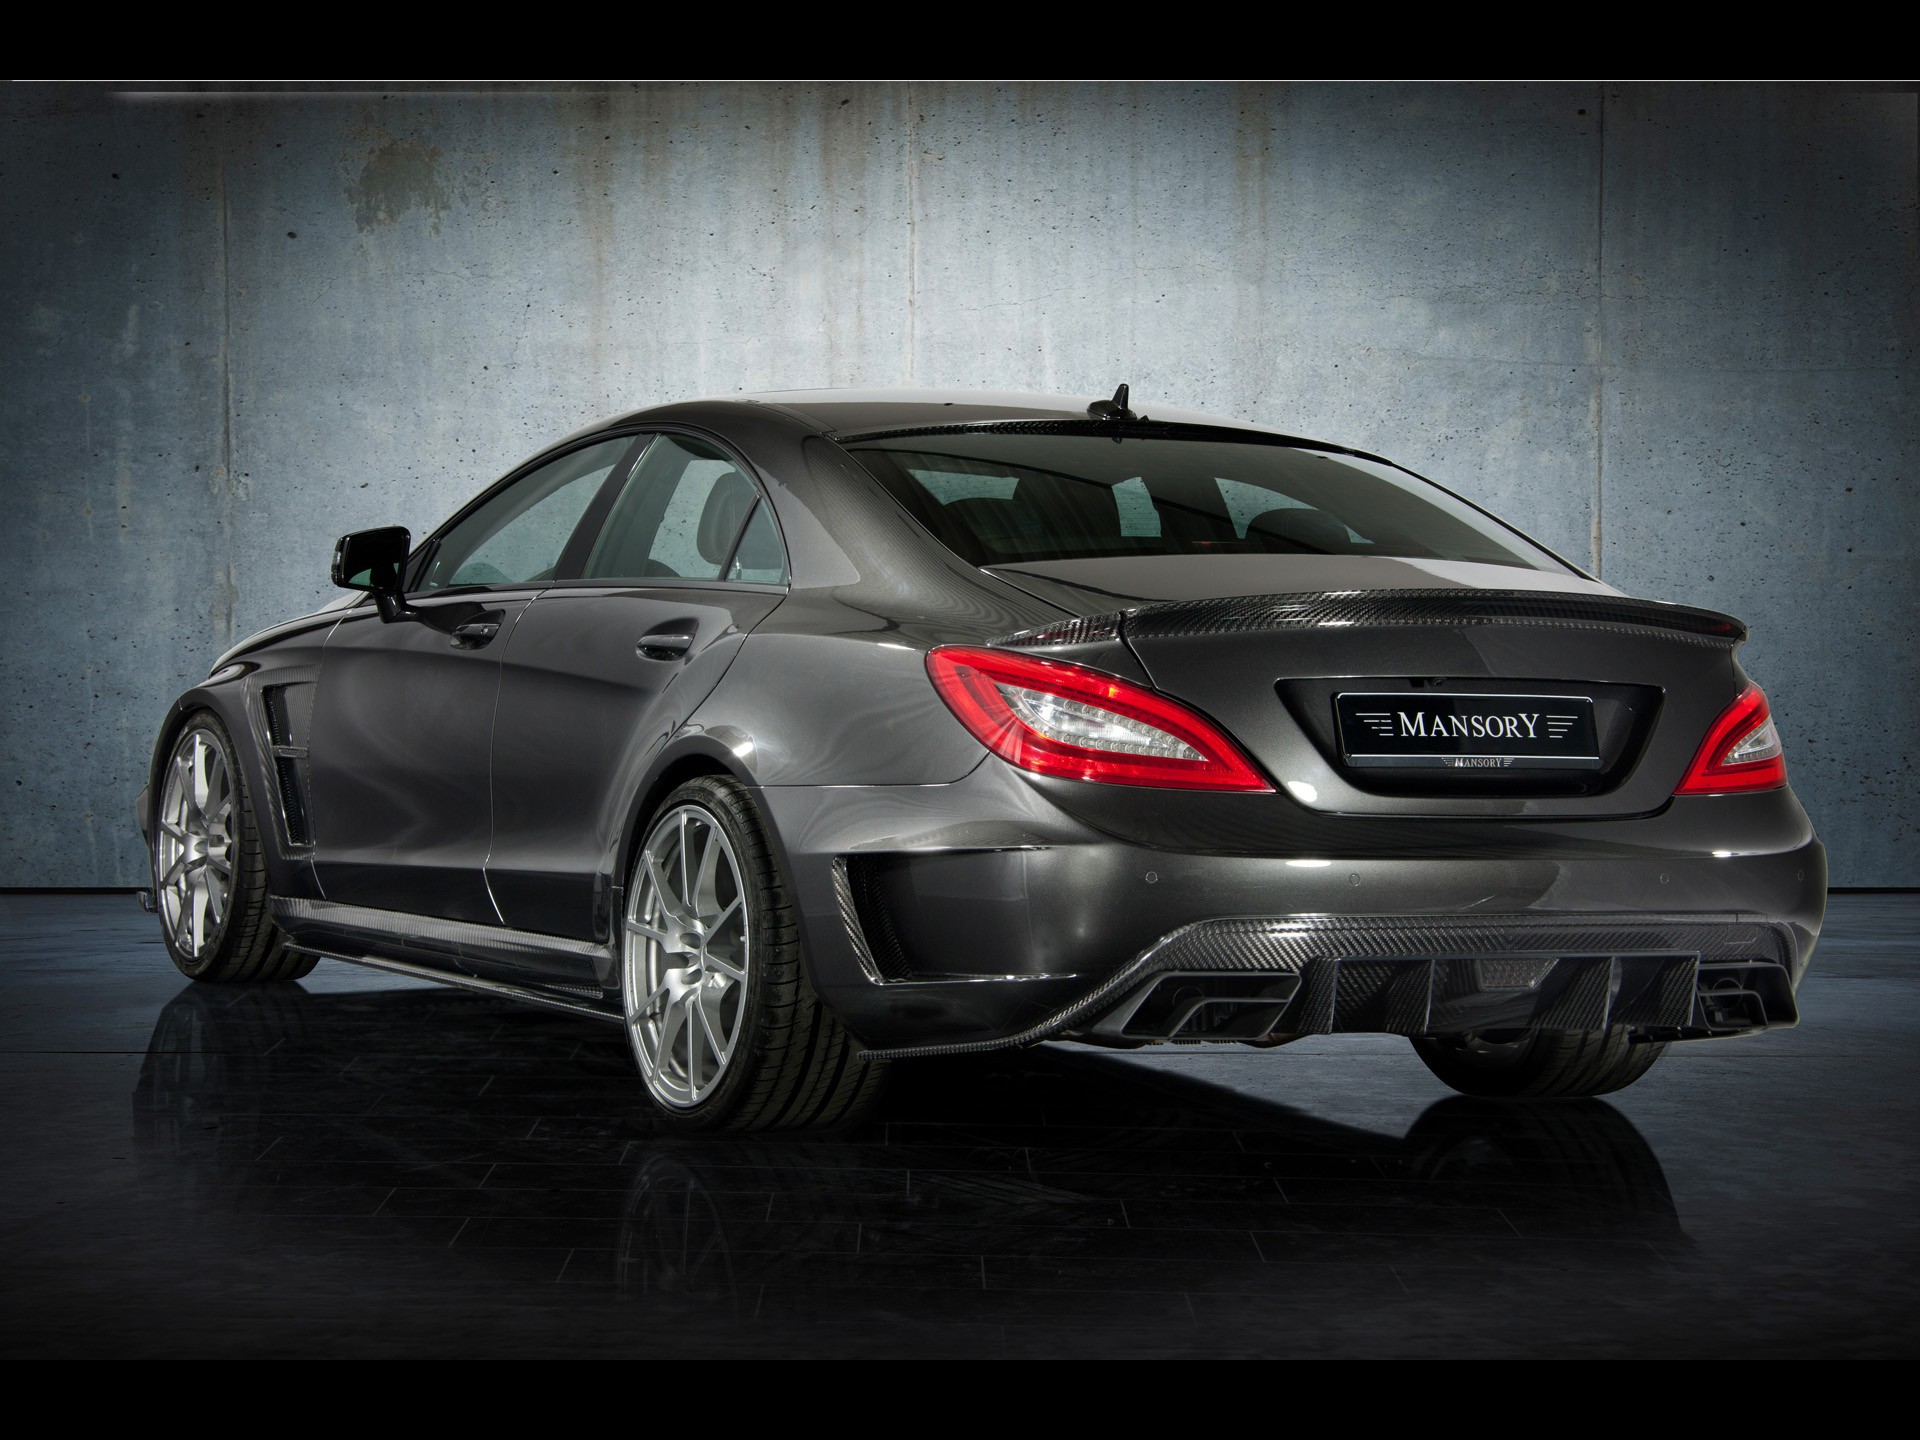 cars, Amg, Supercars, Tuning, Static, Mansory, Mercedes, Benz, Mercedes, Benz, Cls Wallpaper